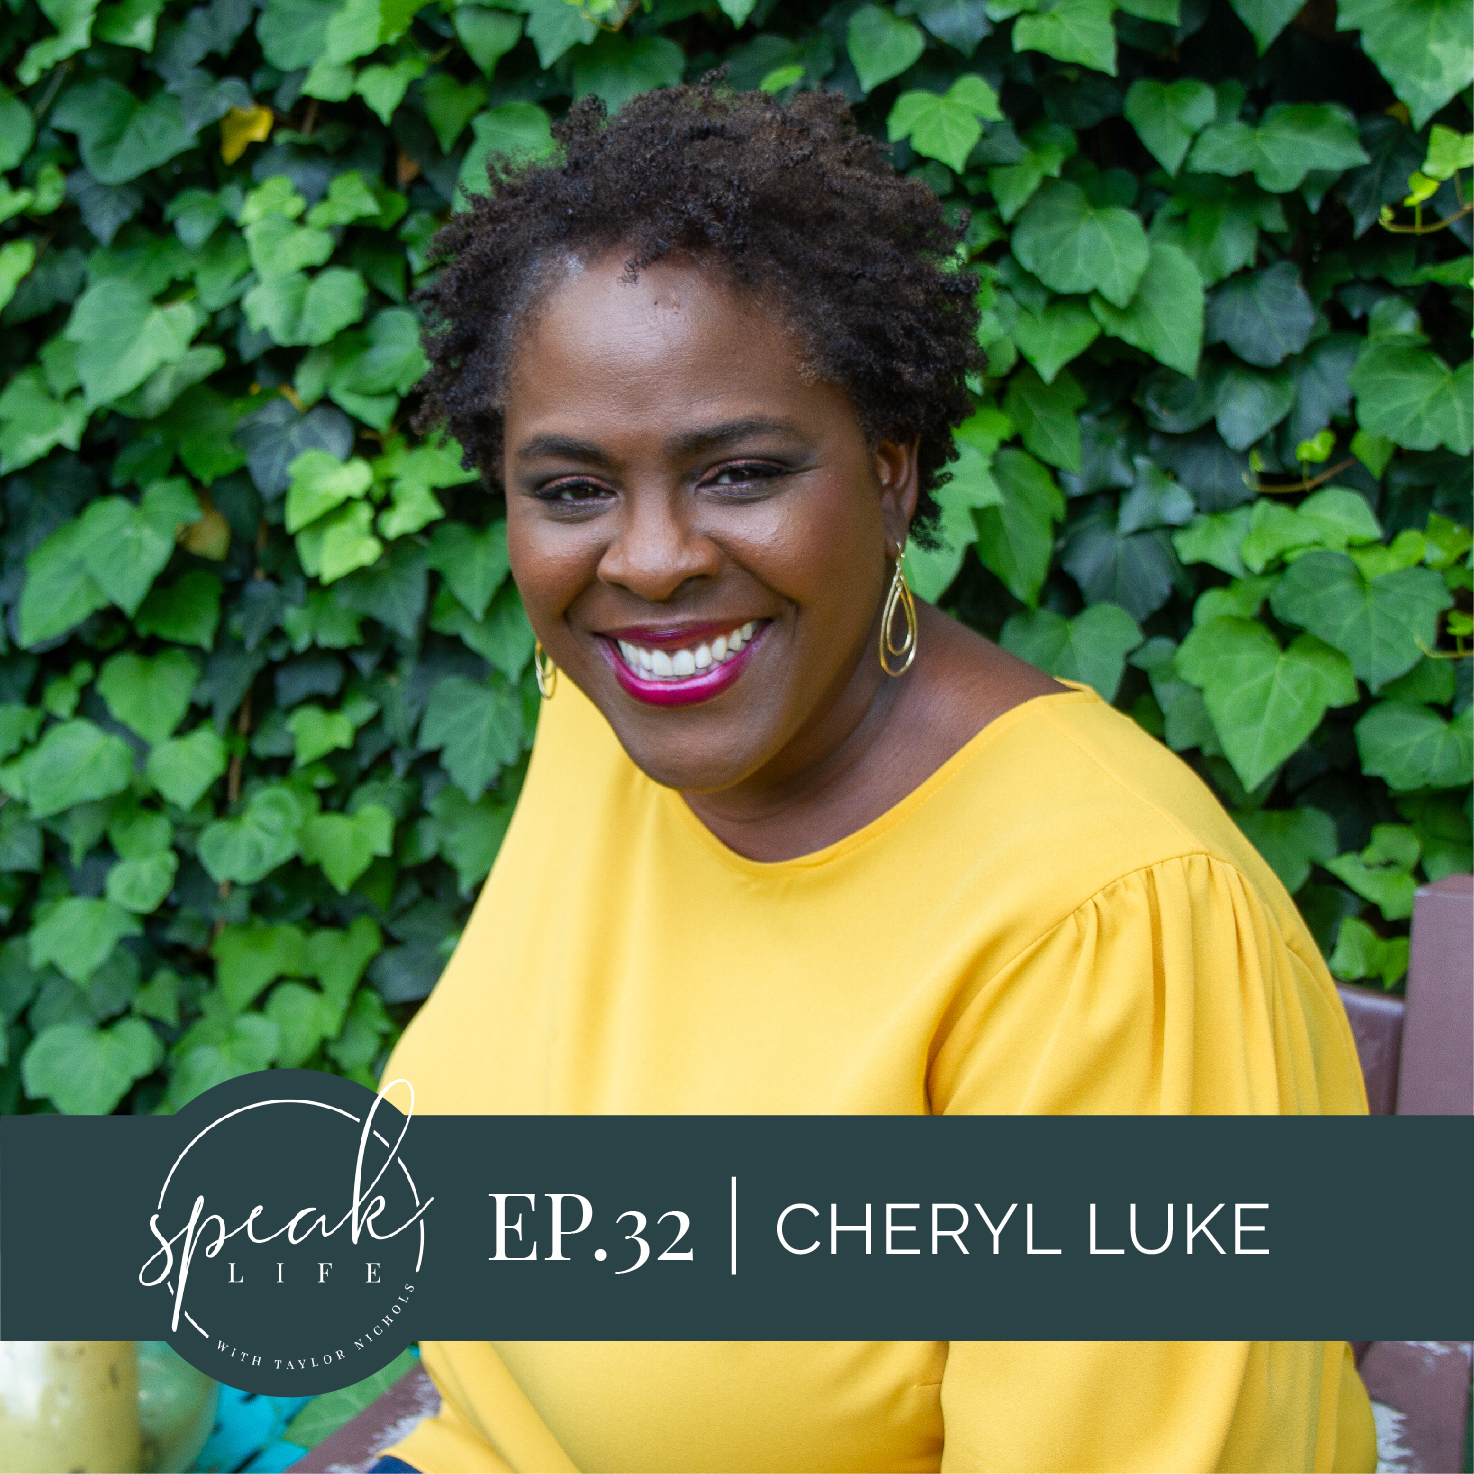 Episode 32. Cheryl Luke – From ‘knowing people’ to ‘knowing God’